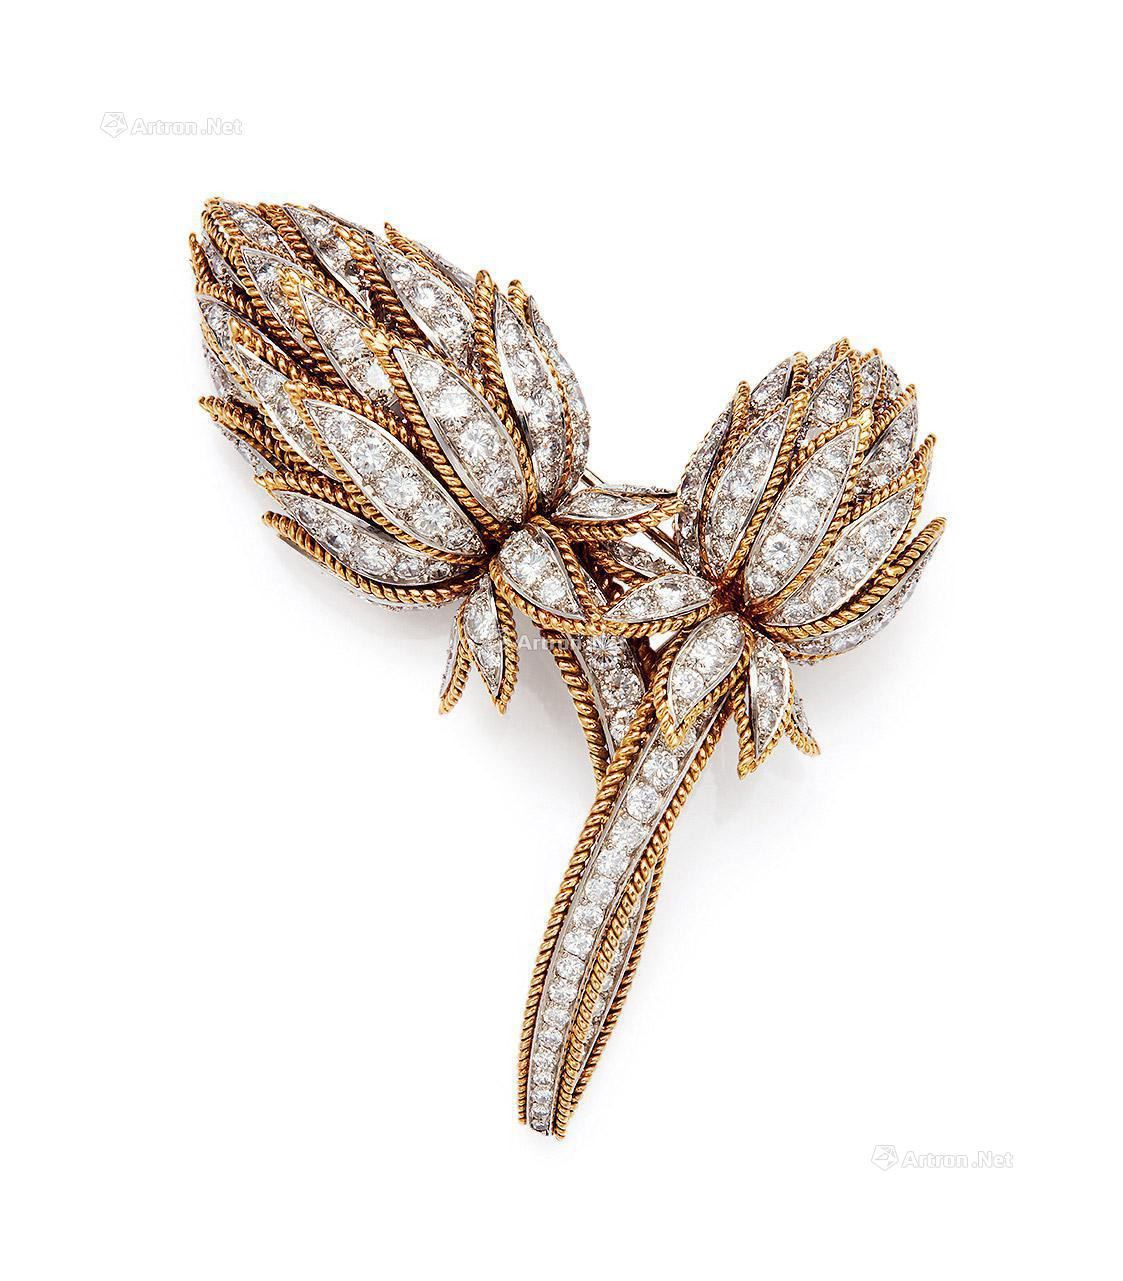 A DIAMOND ‘FLOWER’ BROOCH MOUNTED IN 18K YELLOW GOLD AND 900 PLATINUM，BY VAN CLEEF & ARPELS